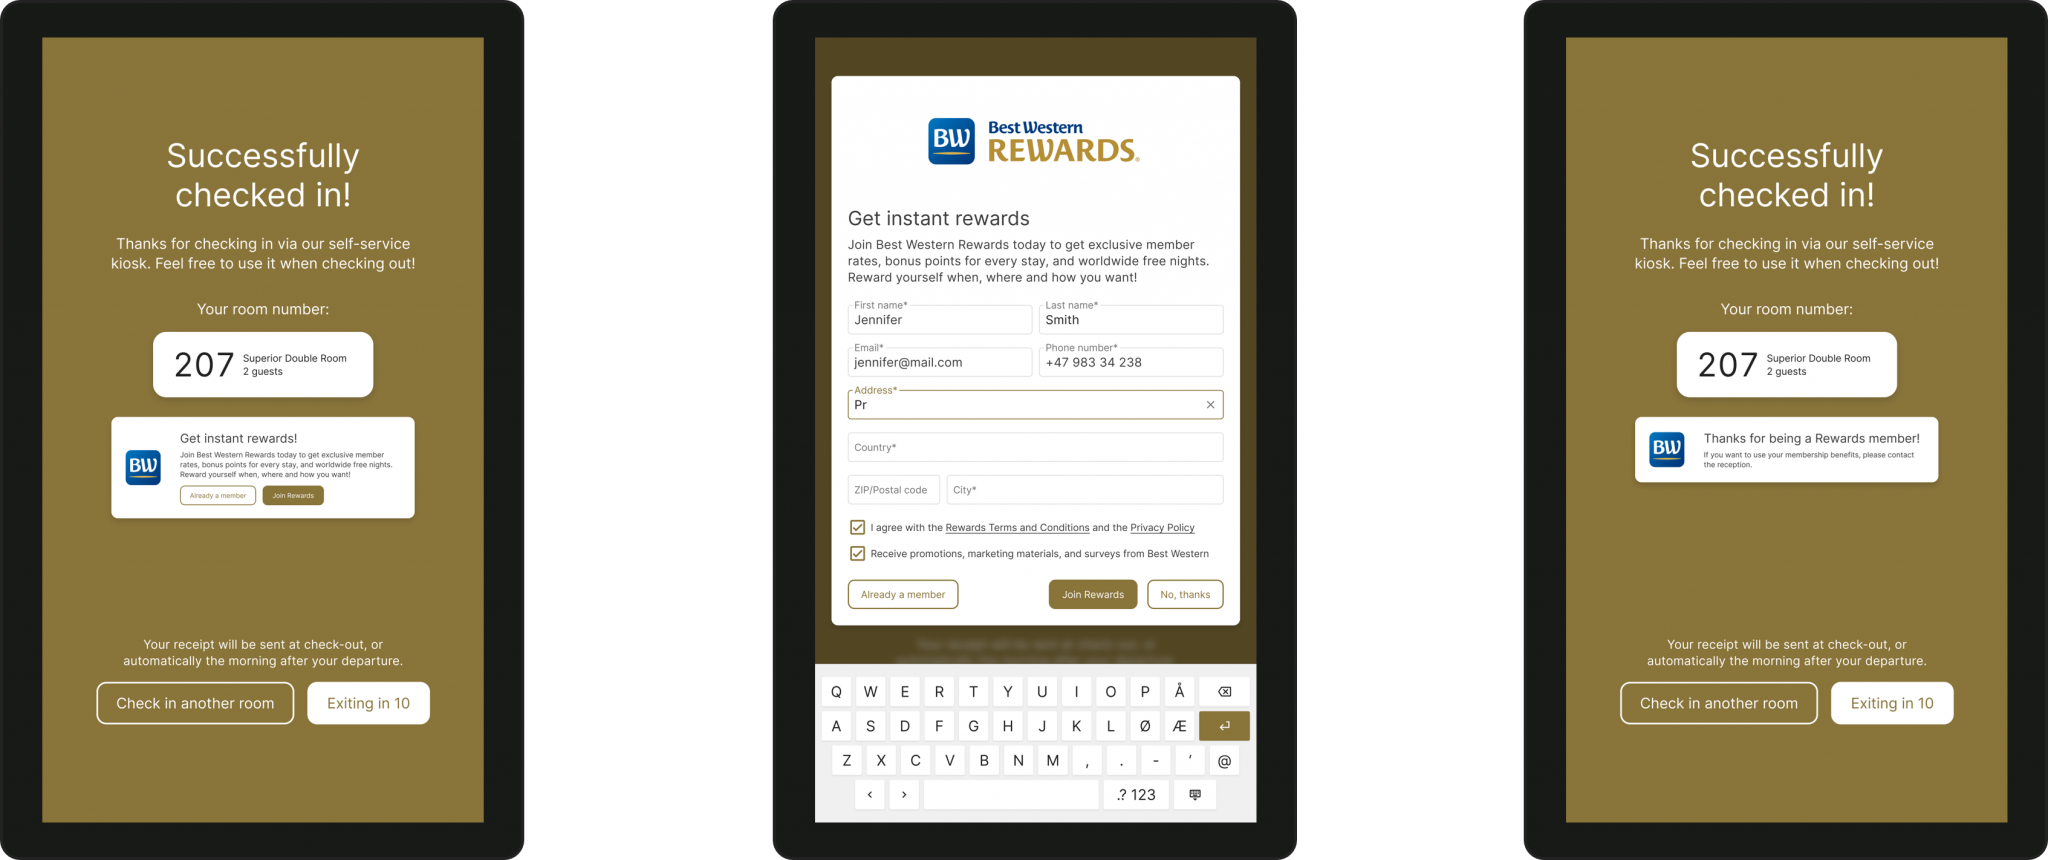 How to increase signups for Hotel Loyalty Programs Uncover the struggles of building up a loyalty program, learn how to effectively gain more members and see how Best Western increased their sign-up by 40% with a single integration.